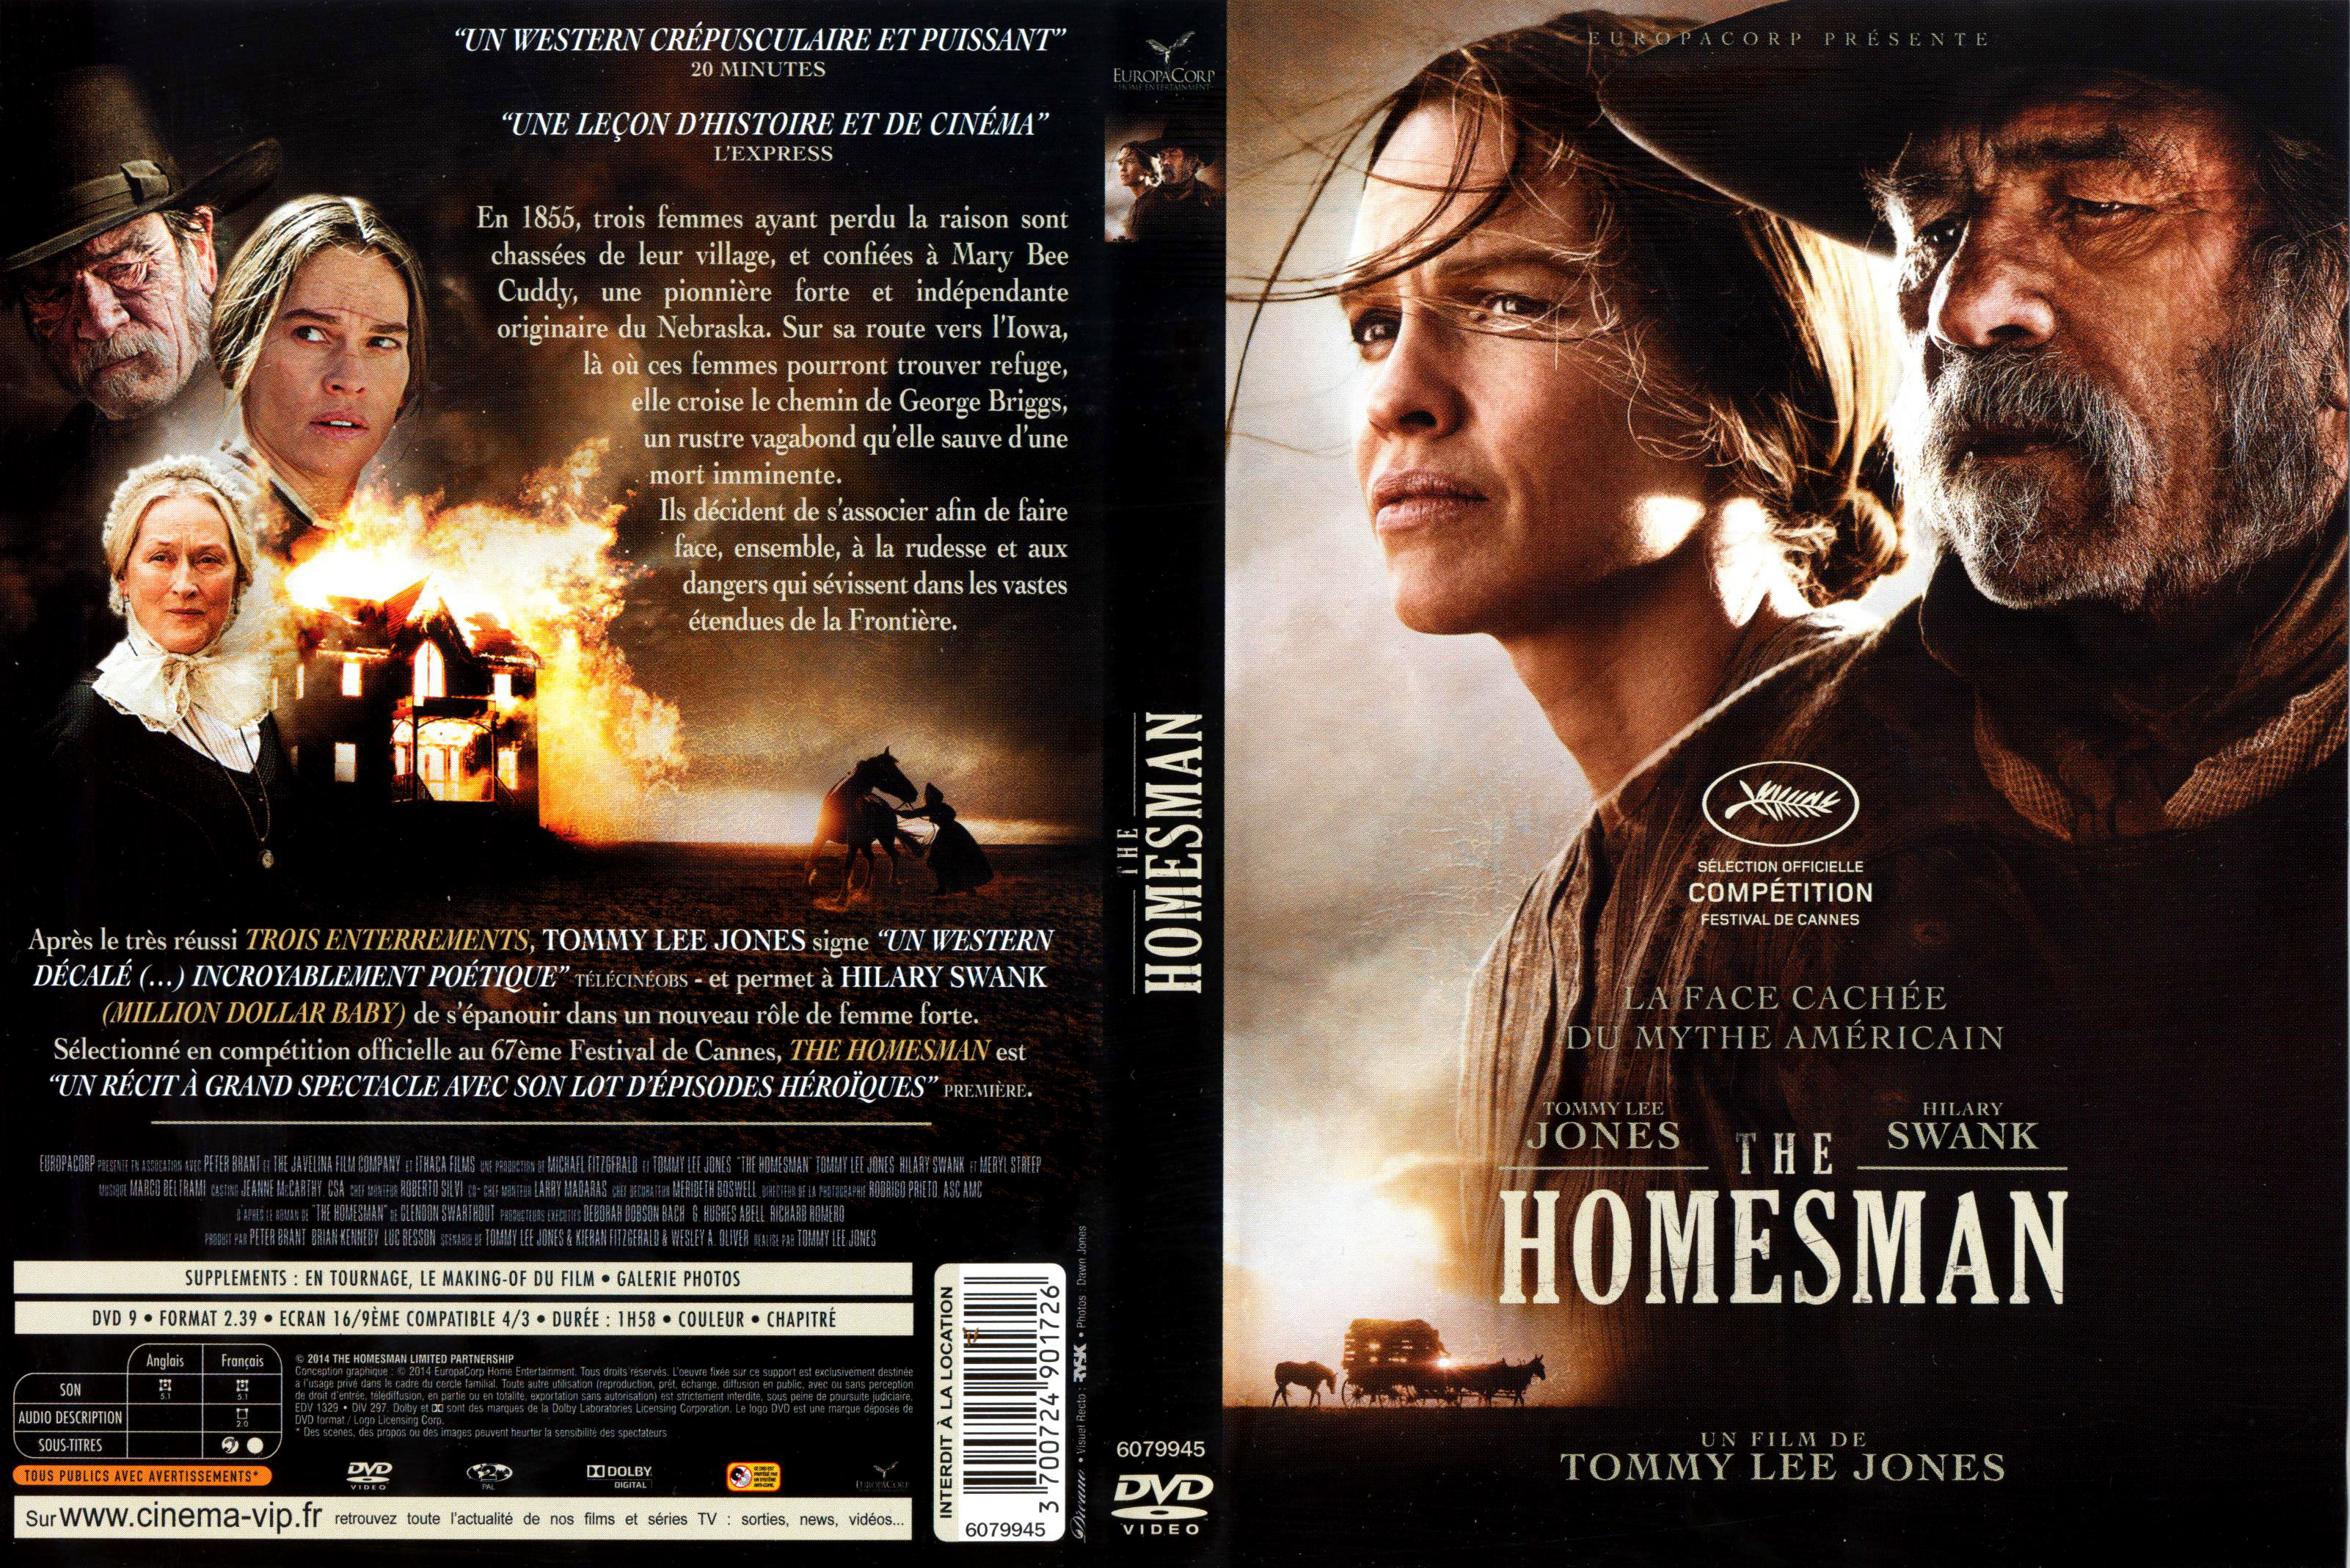 Jaquette DVD The Homesman